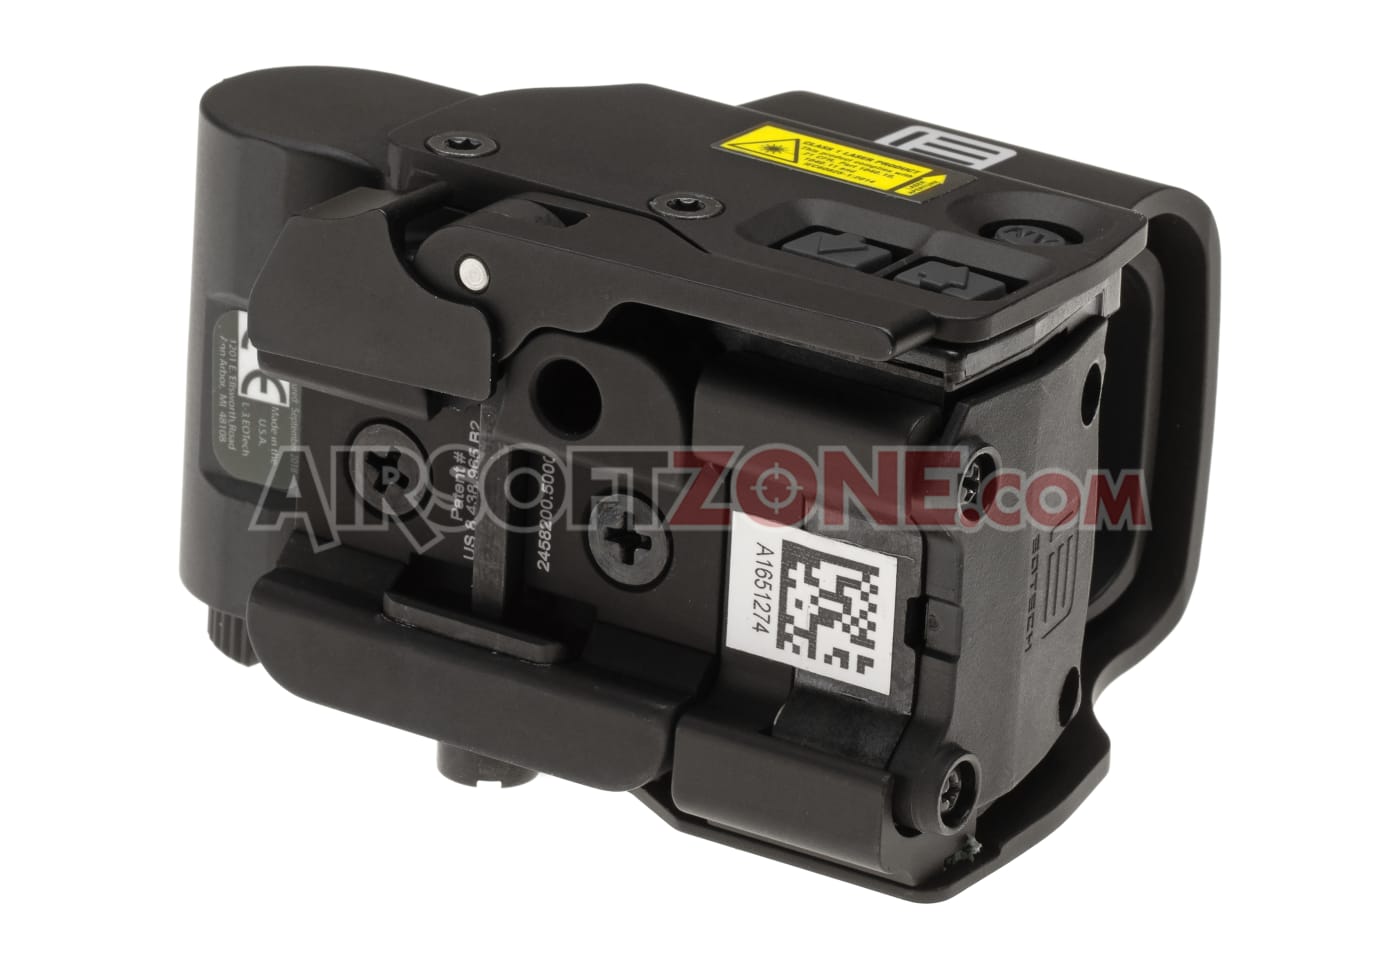 EoTech EXPS3-0 (2024) - Airsoftzone